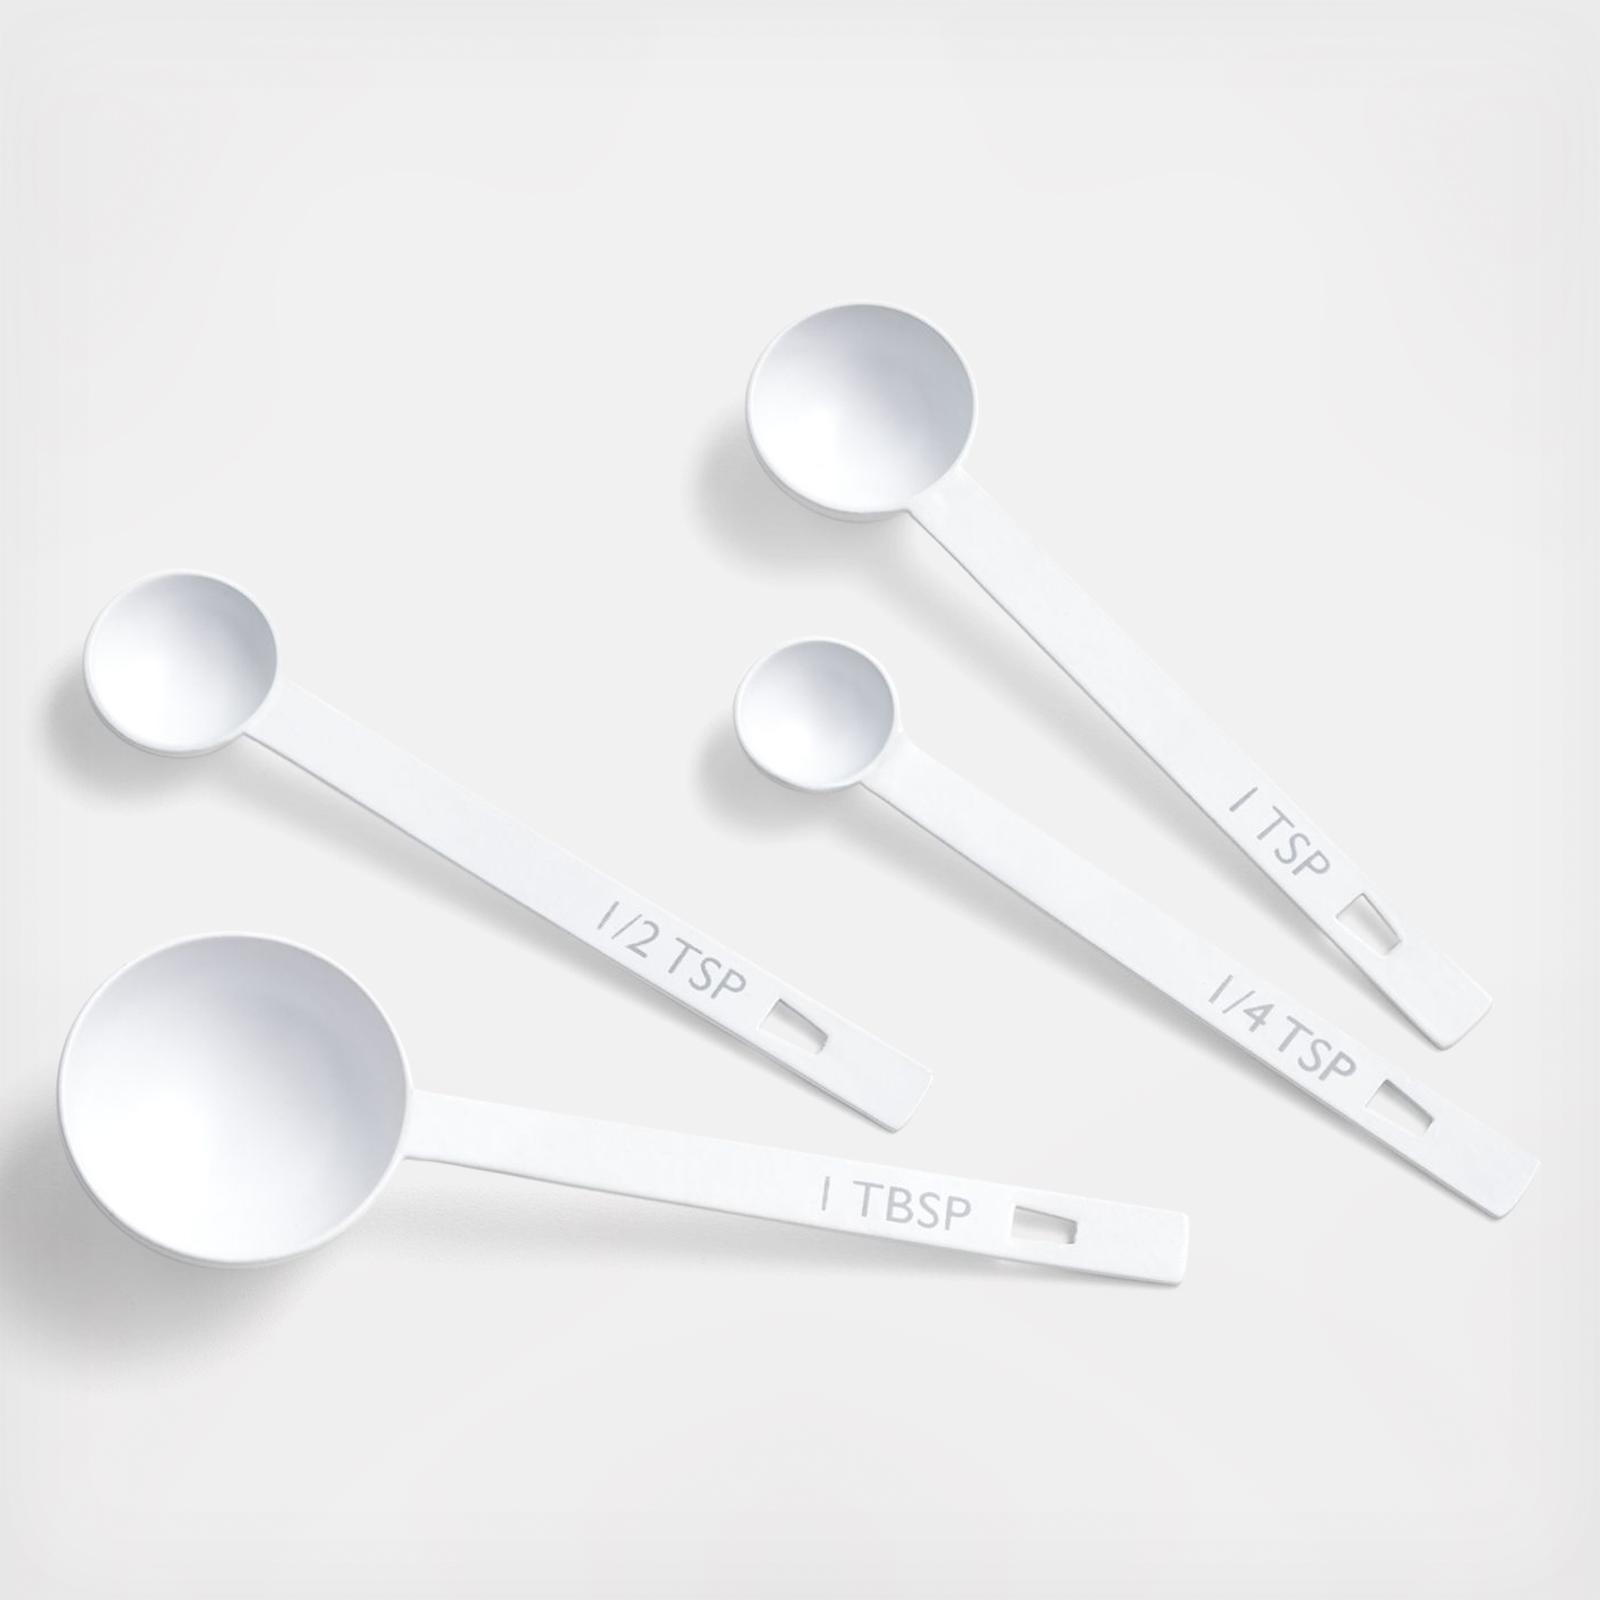 Stainless Steel Measuring Cups, Set of 4 by Molly Baz + Reviews